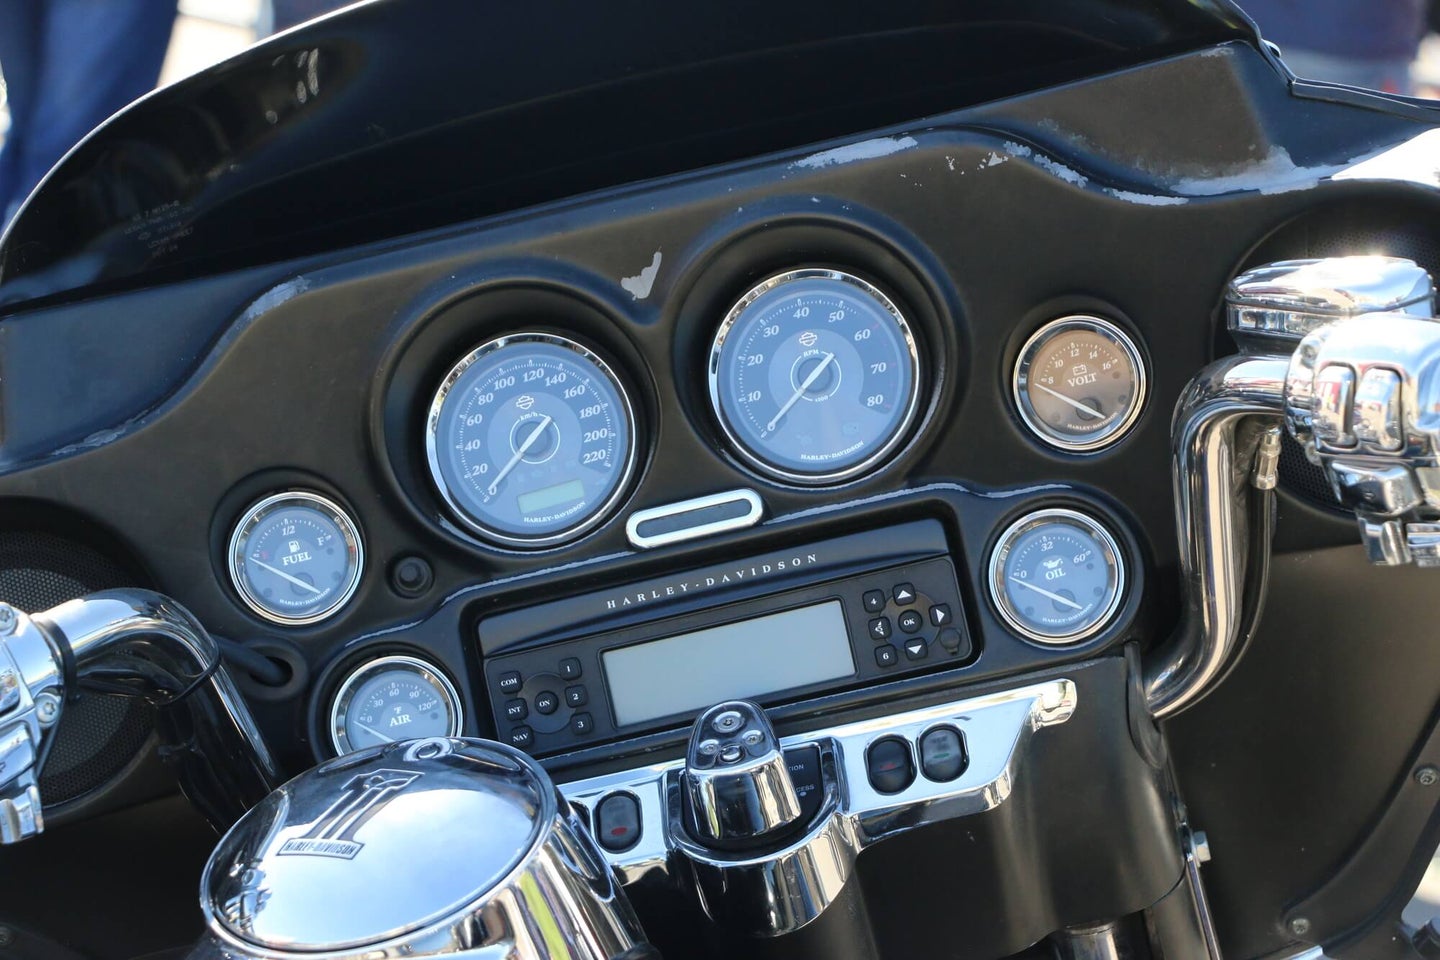 Best Motorcycle Fairing Speaker Systems: A More Enjoyable Ride with Music